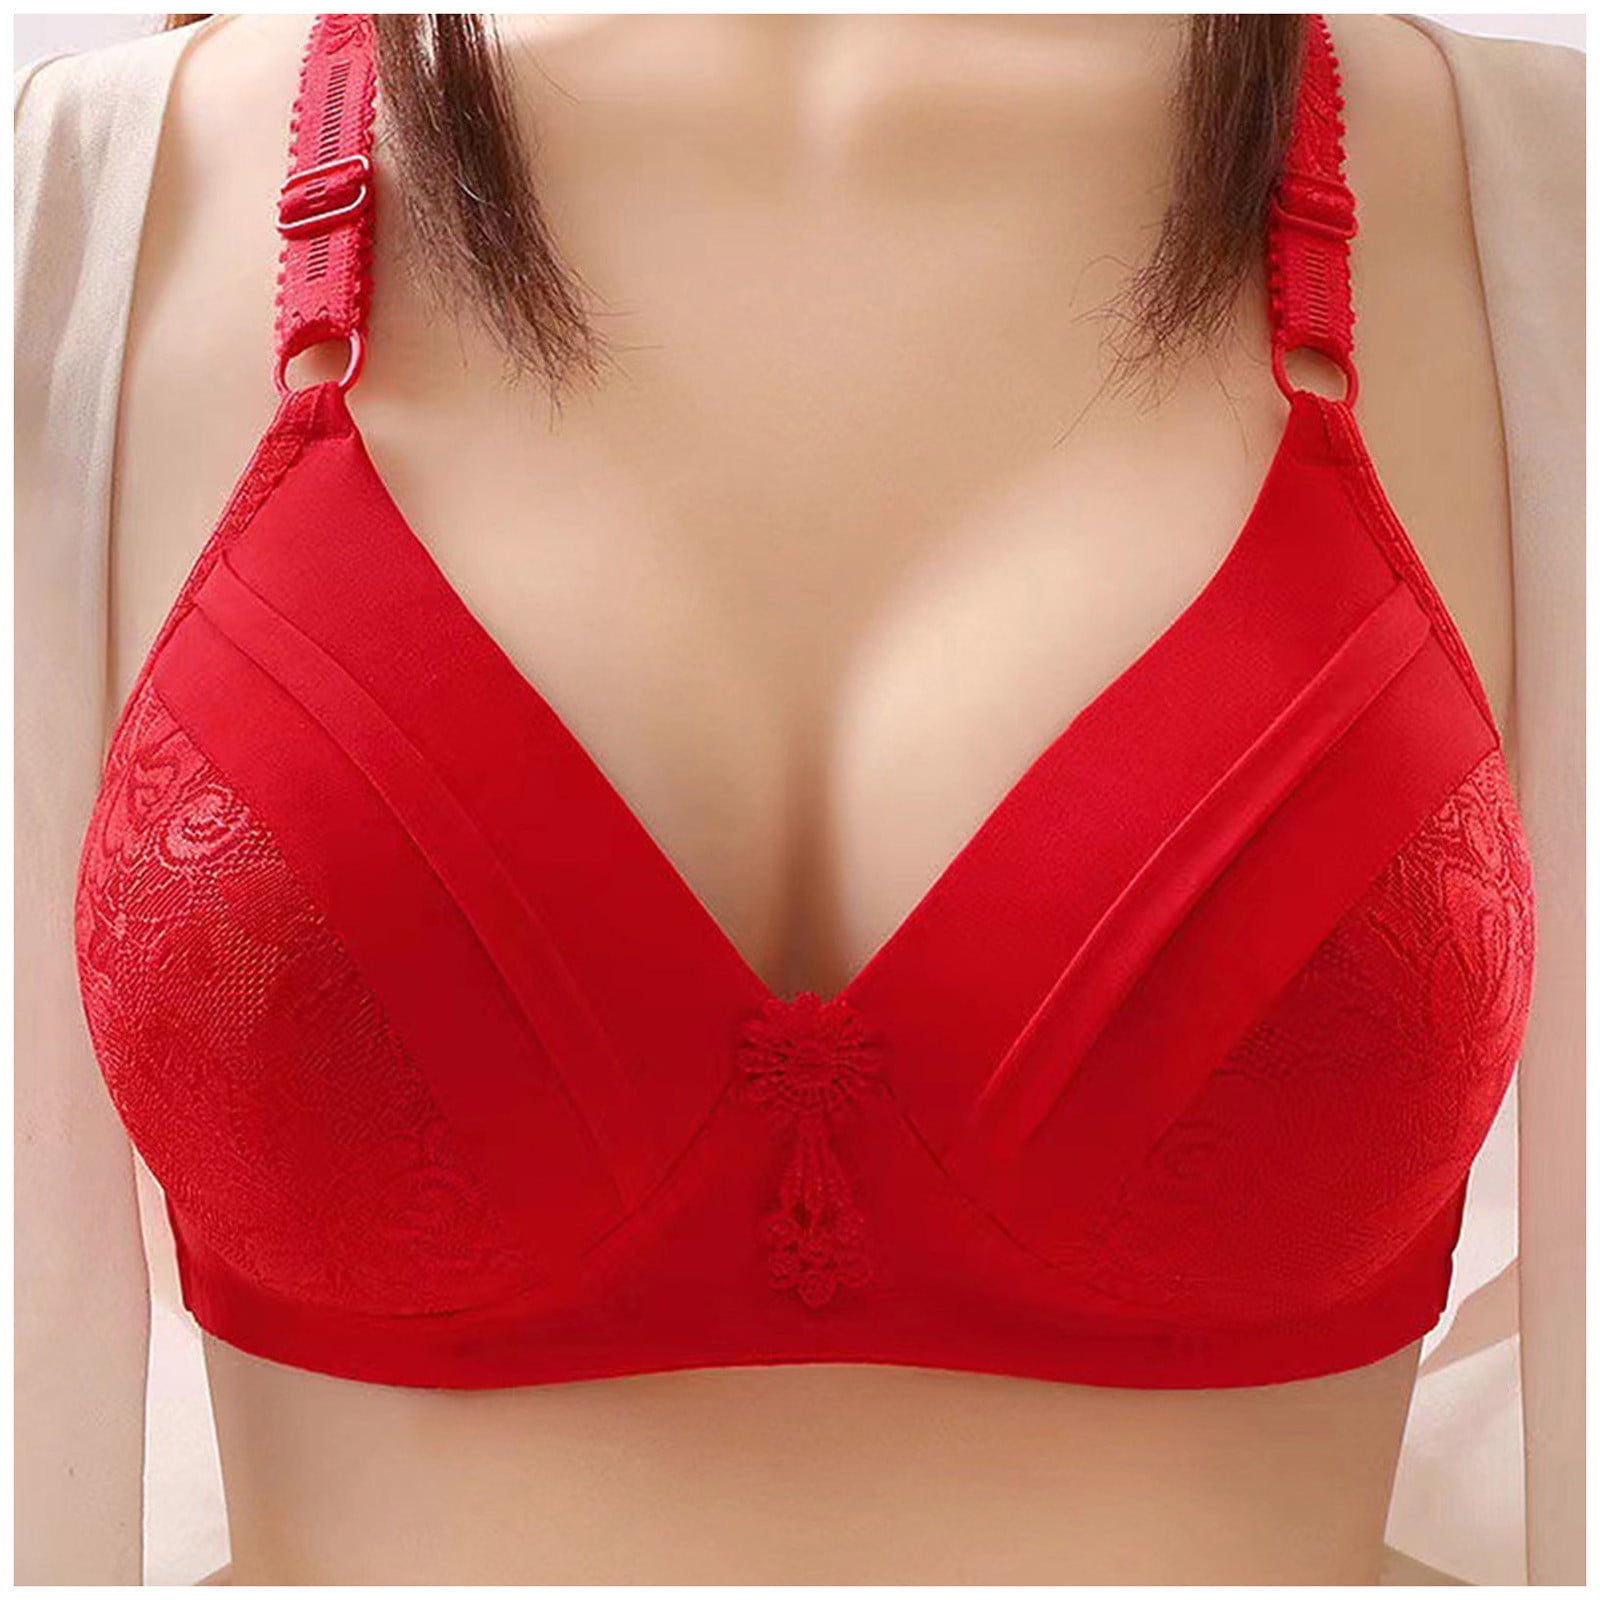 Qiaocaity Women Bras High Support Underwear Womens Solid Lace